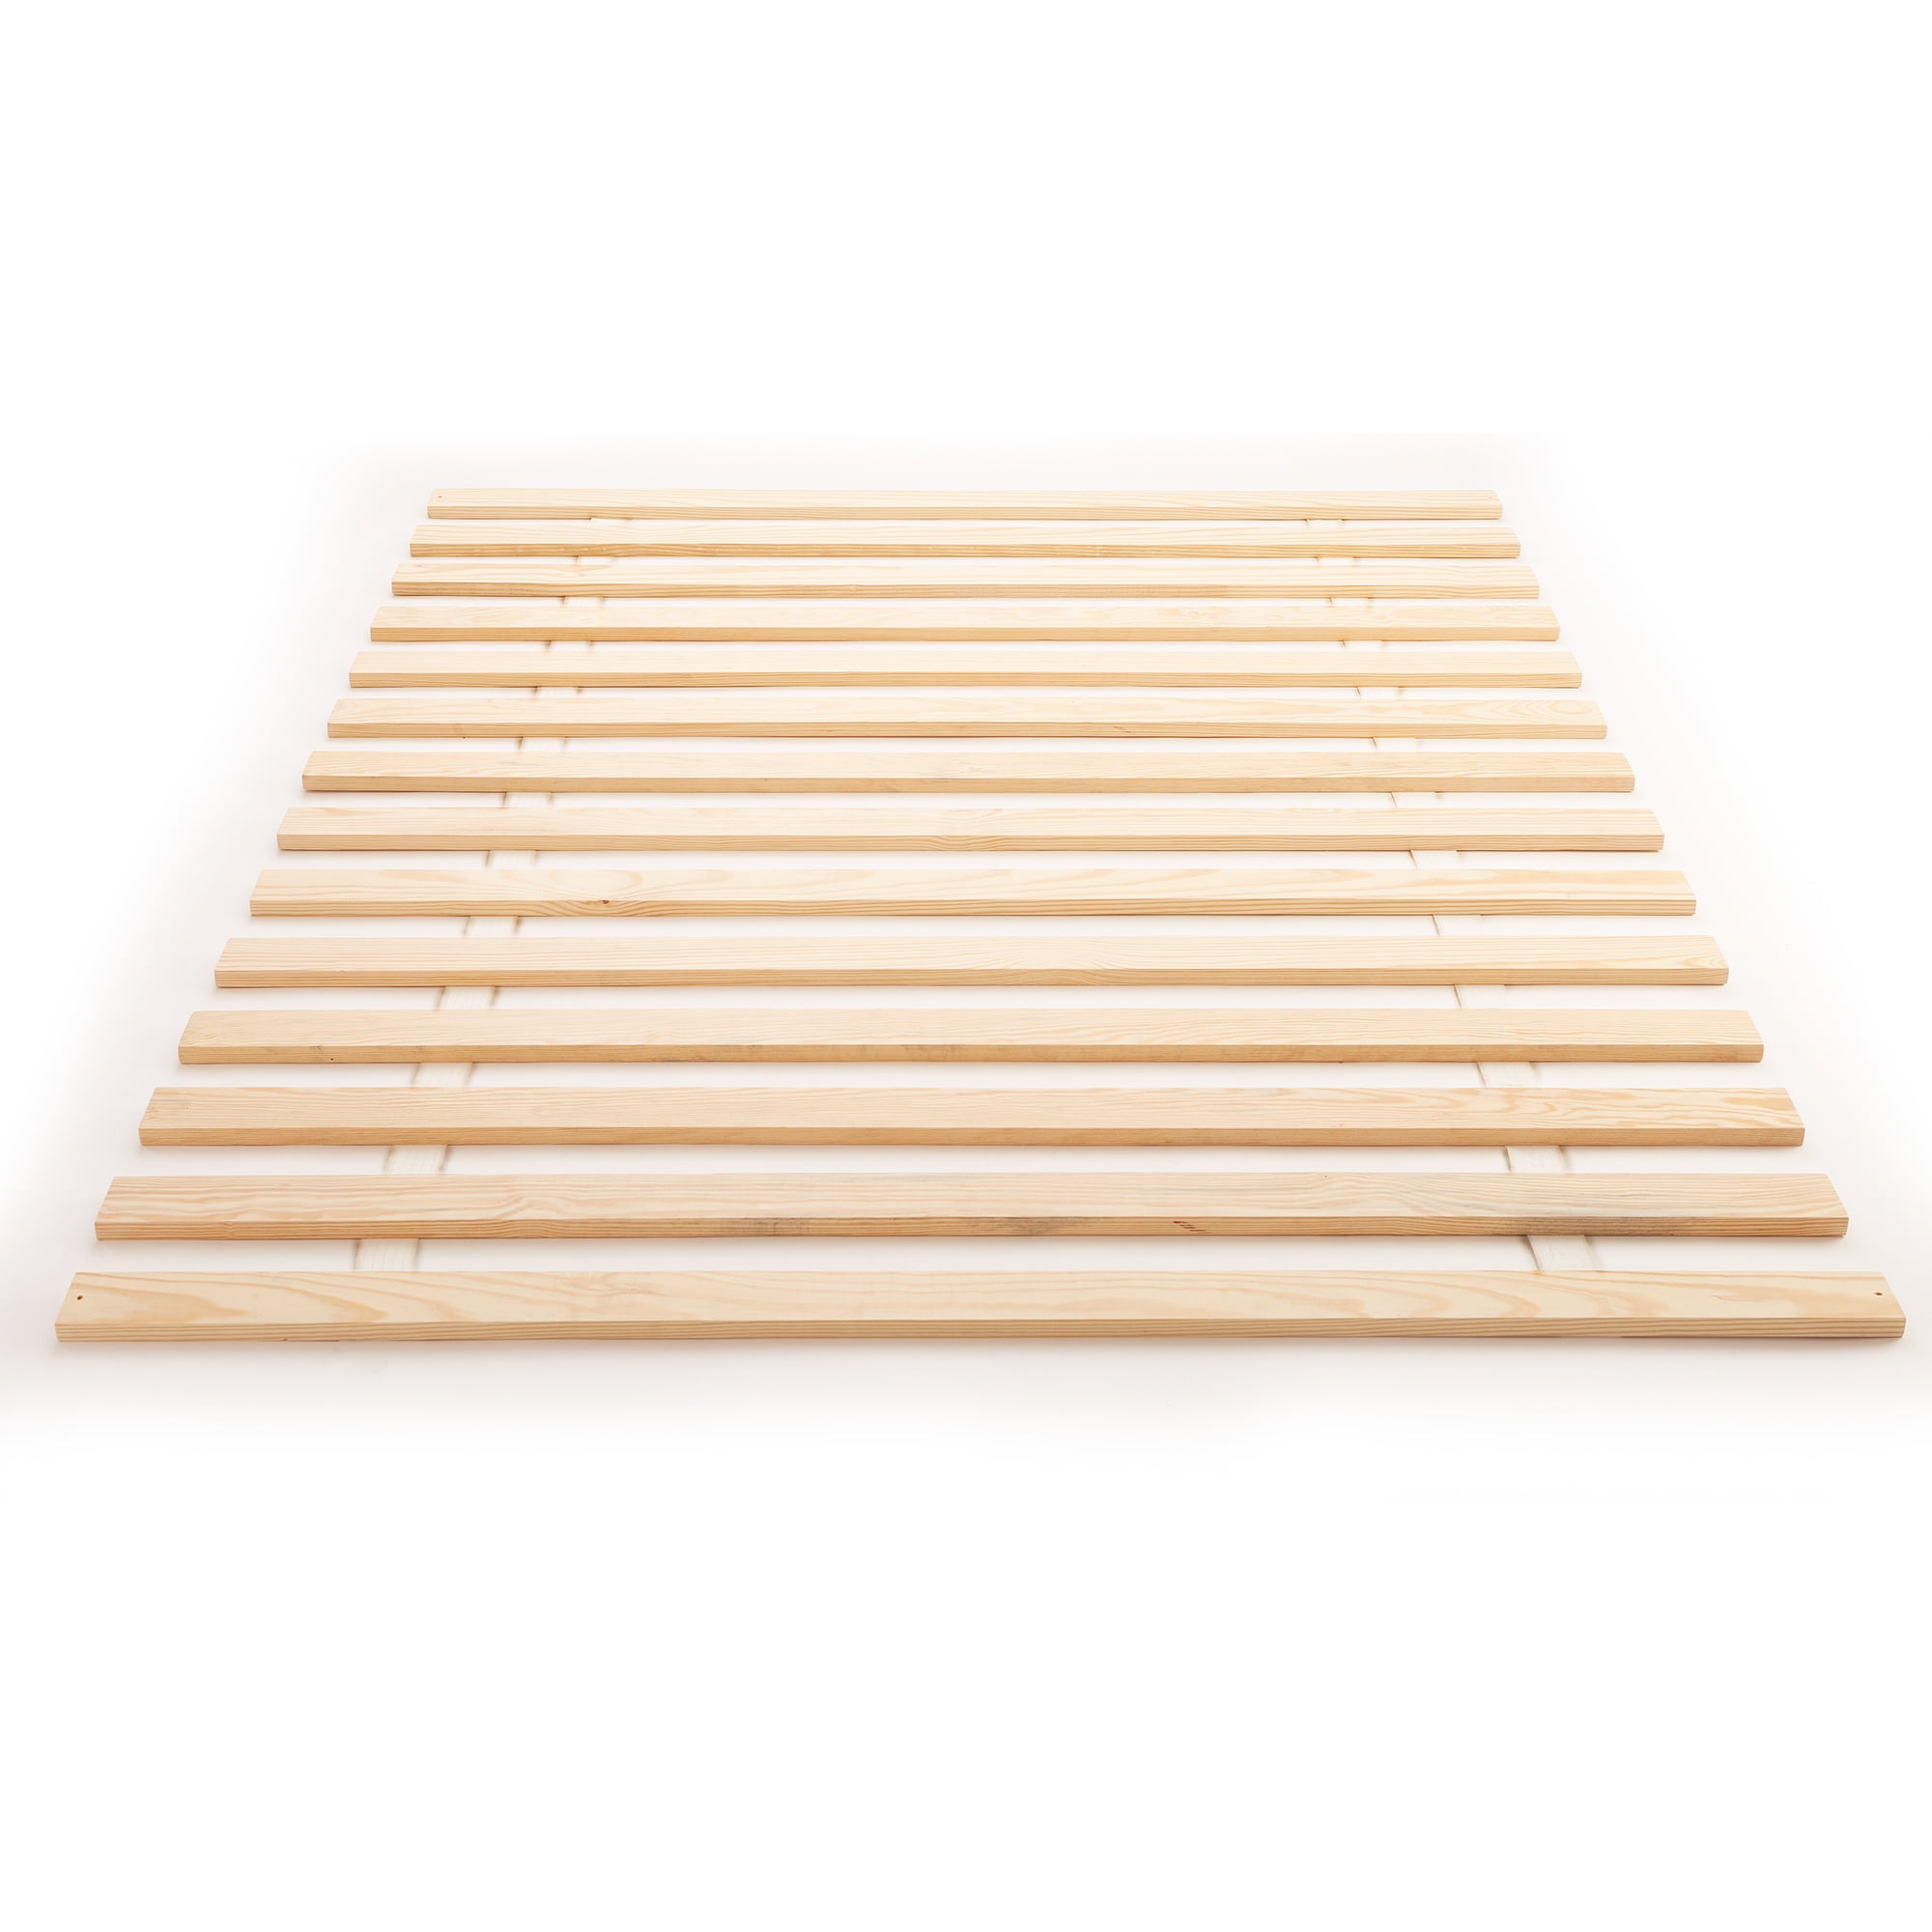 All Bed Sizes Webbed Replacement Pine Wooden Flat Bed Slats